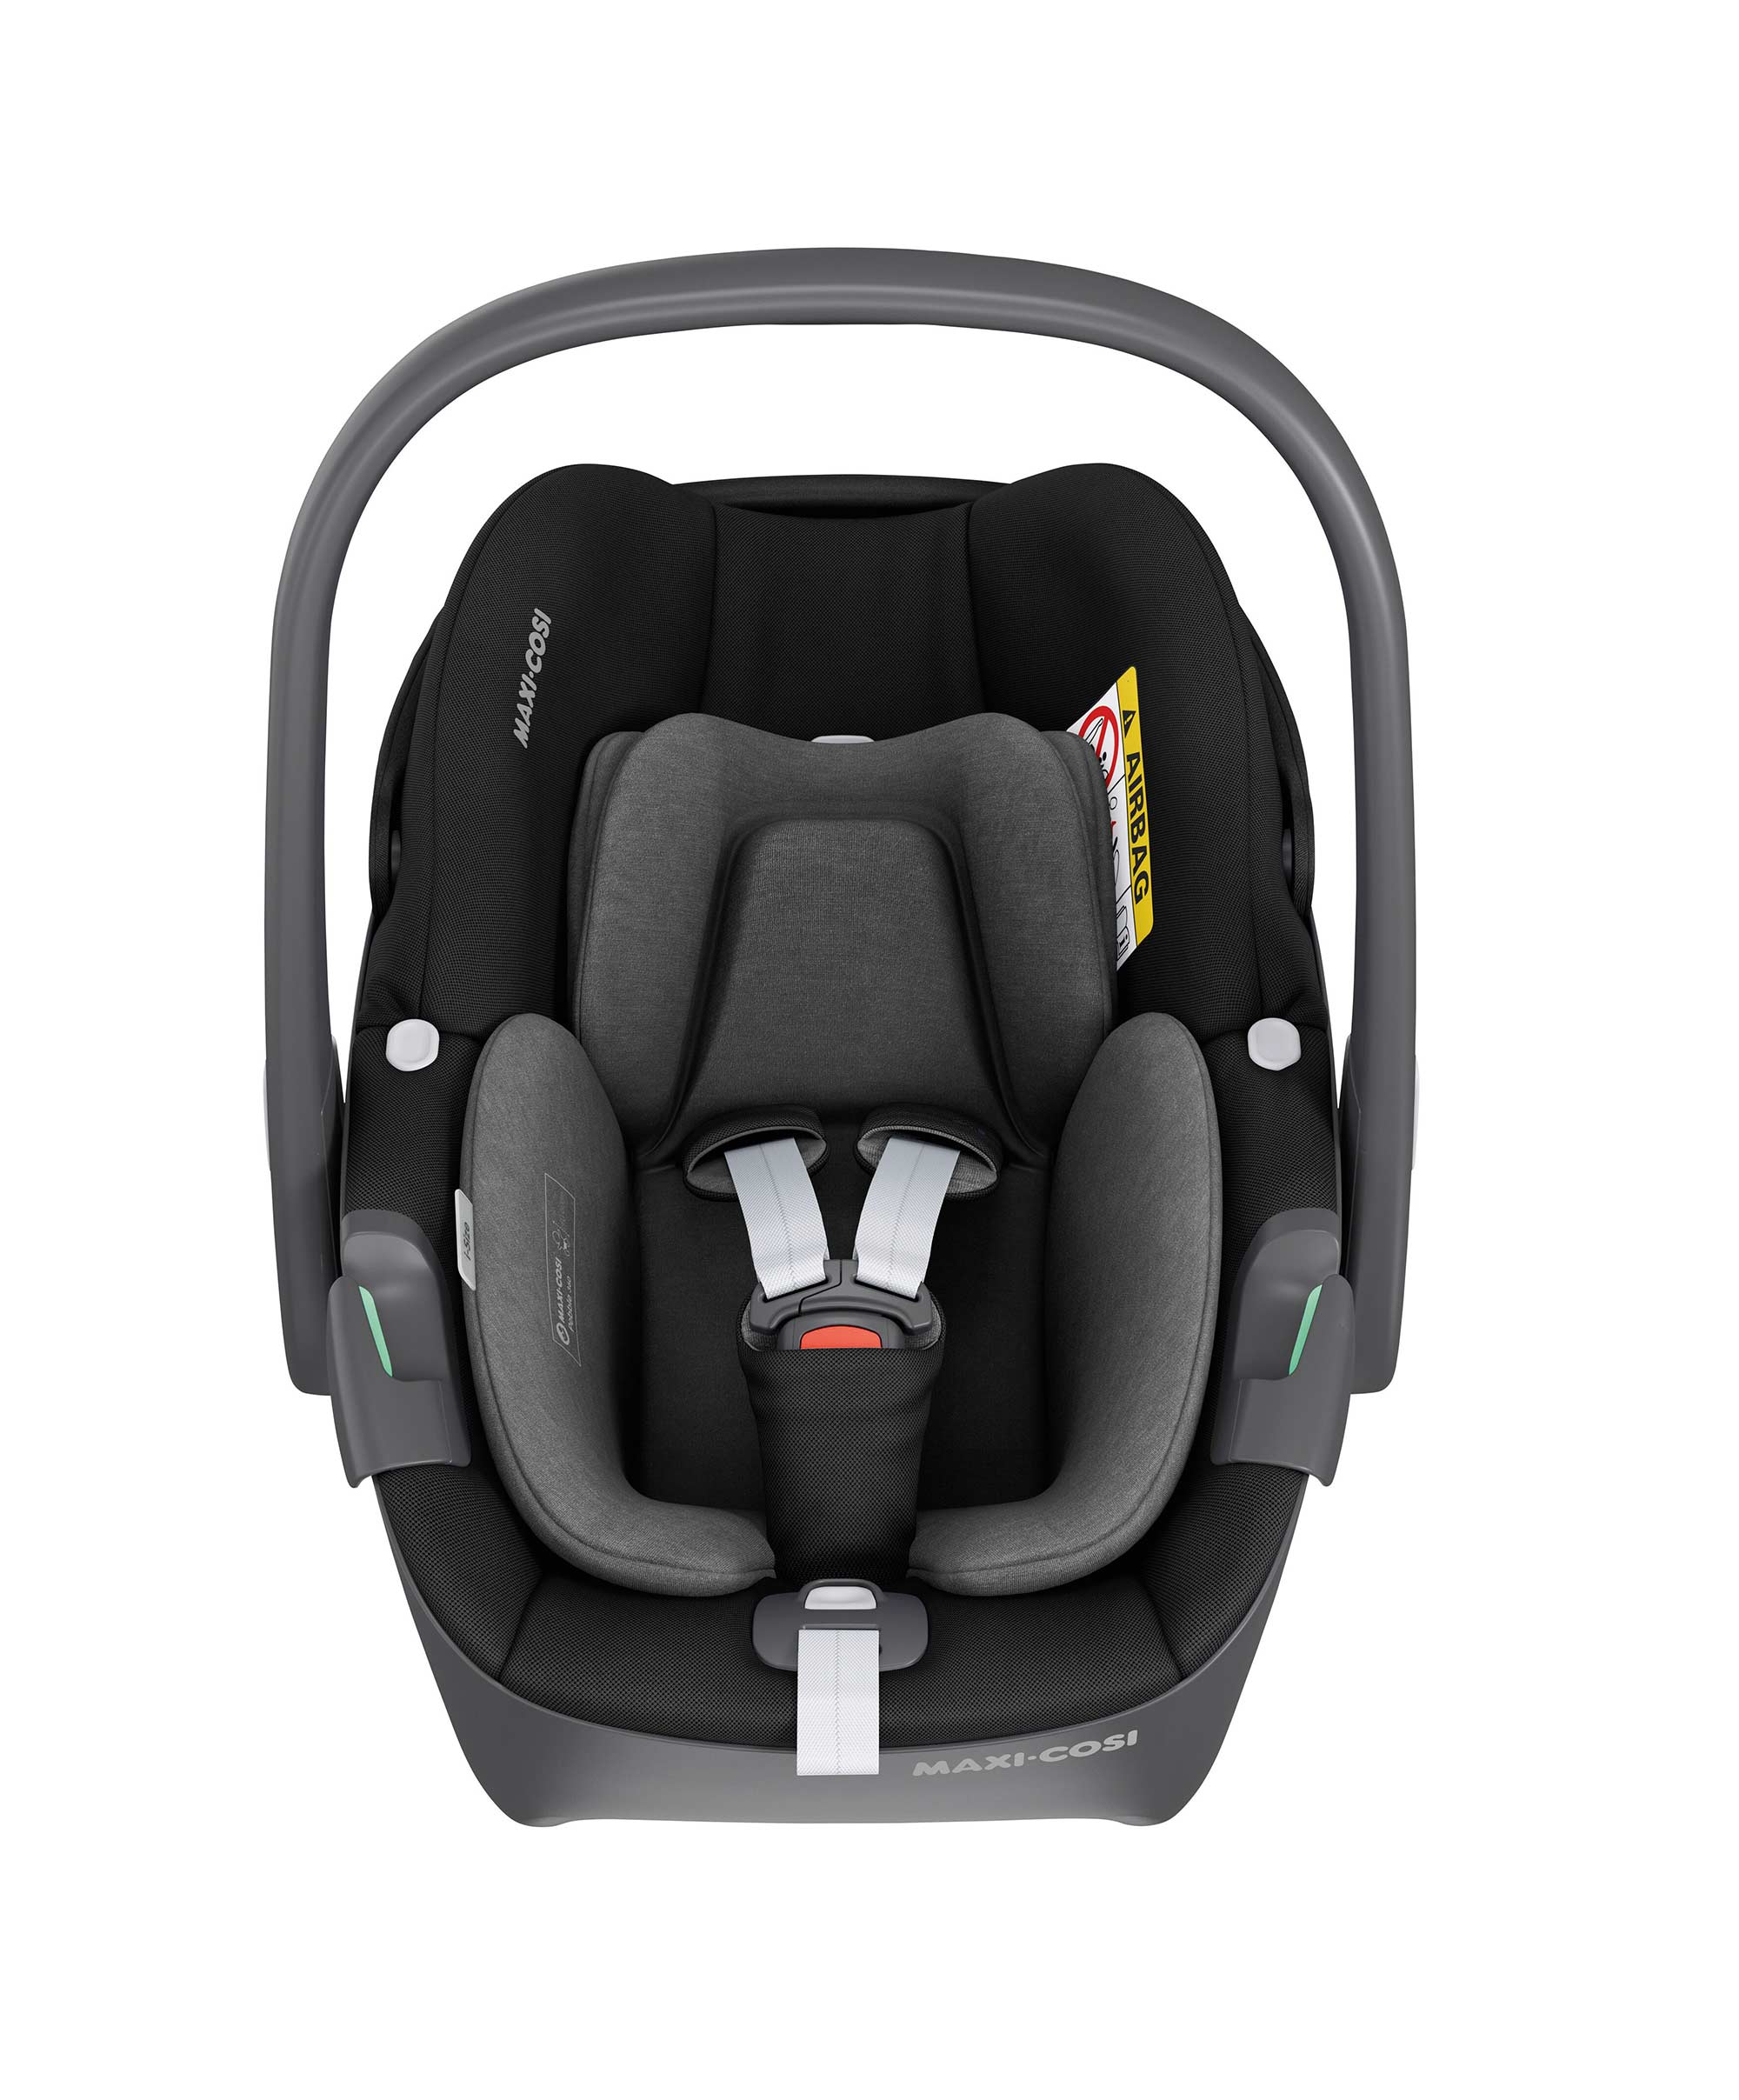 How to Remove a Maxi Cosi Car Seat From the Base in a Few Simple